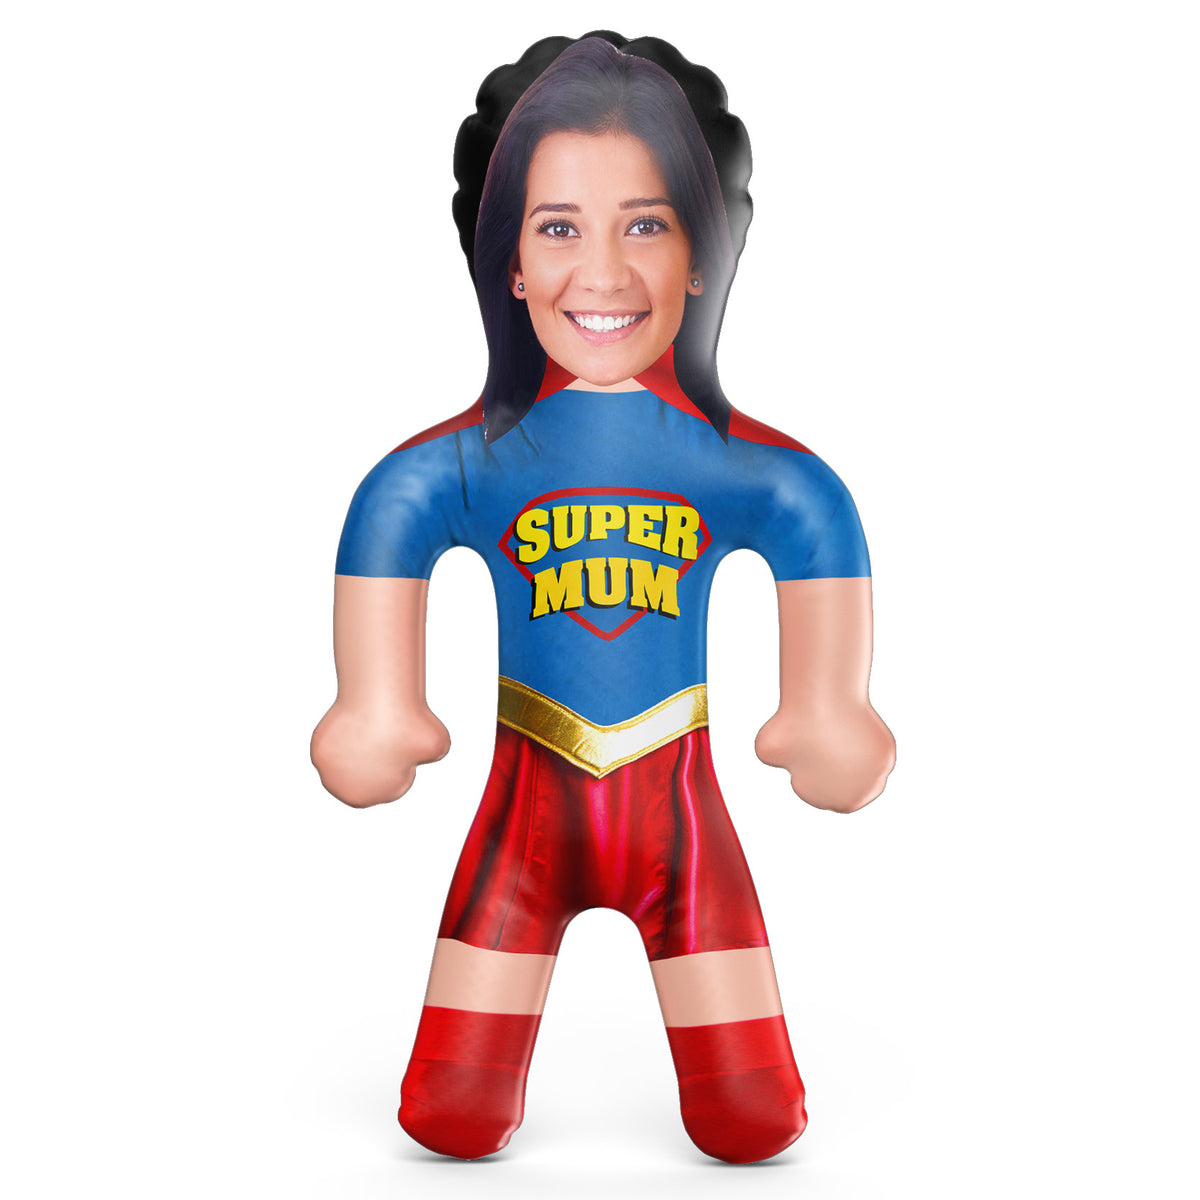 Super Mum Inflatable Doll - Custom Blow Up Doll